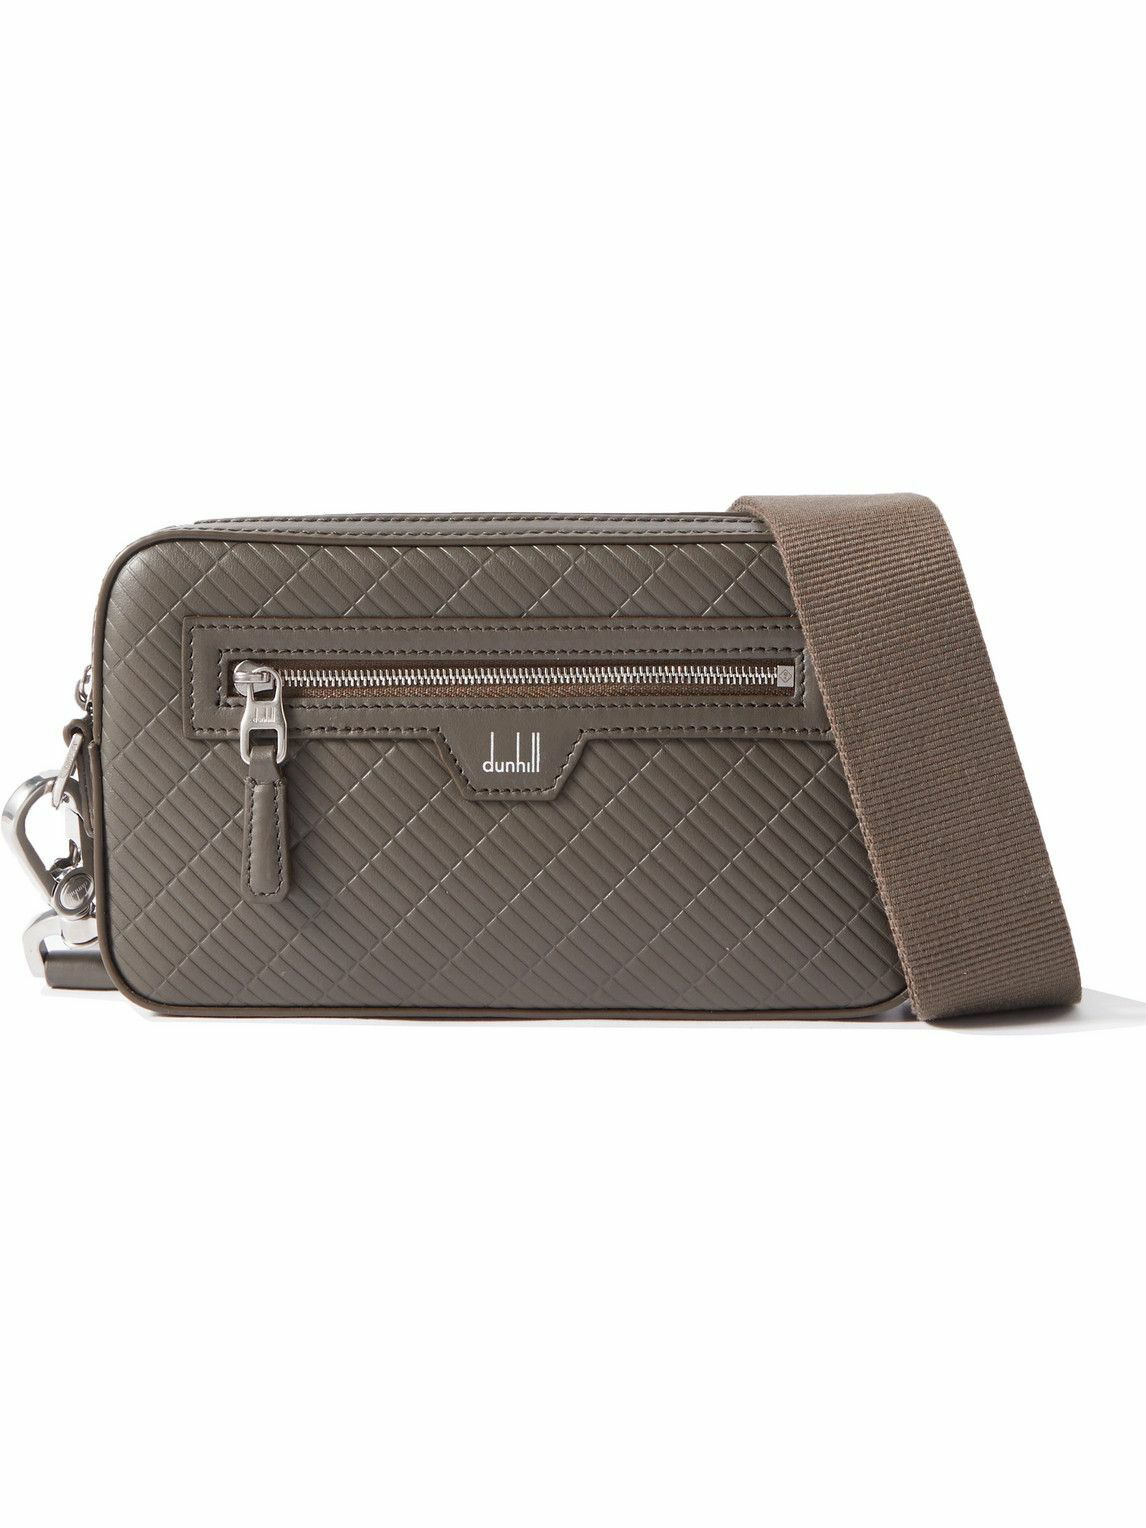 Photo: Dunhill - Contour West End Embossed Leather Messenger Bag